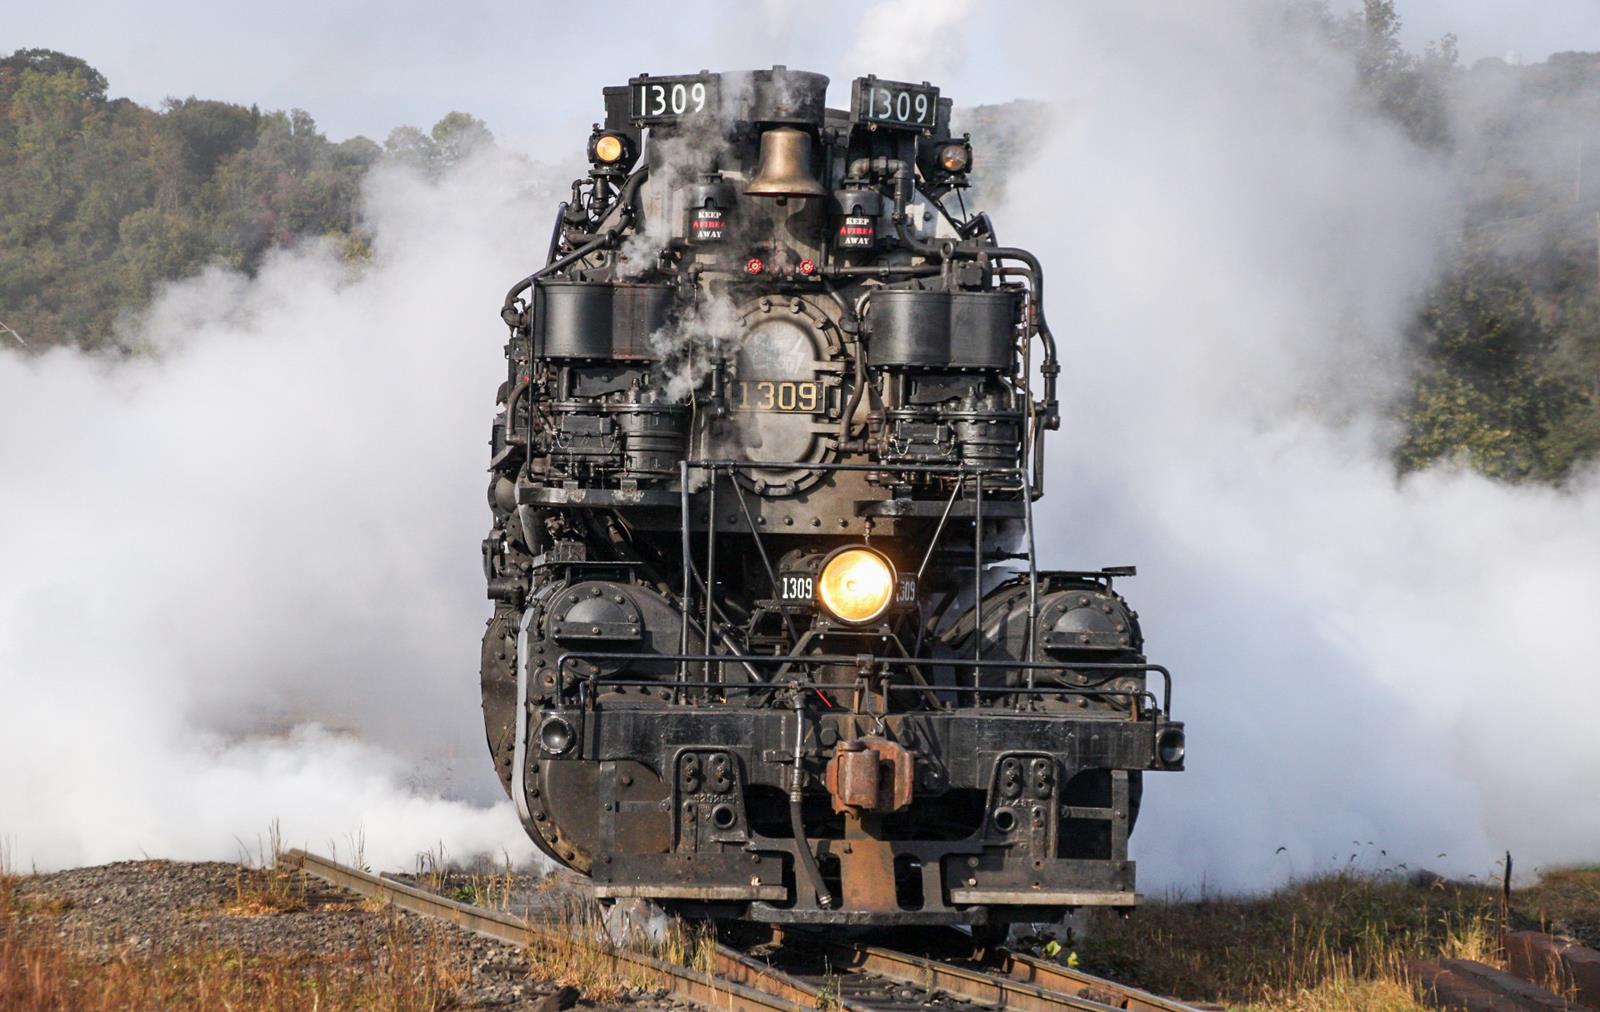 WMSR 1309 is a class Steam 2-6-6-2 and  is pictured in Ridgeley, West Virginia, United States.  This was taken along the N/A on the Western Maryland Scenic Railroad. Photo Copyright: Ian Cole uploaded to Railroad Gallery on 11/14/2022. This photograph of WMSR 1309 was taken on Wednesday, October 12, 2022. All Rights Reserved. 